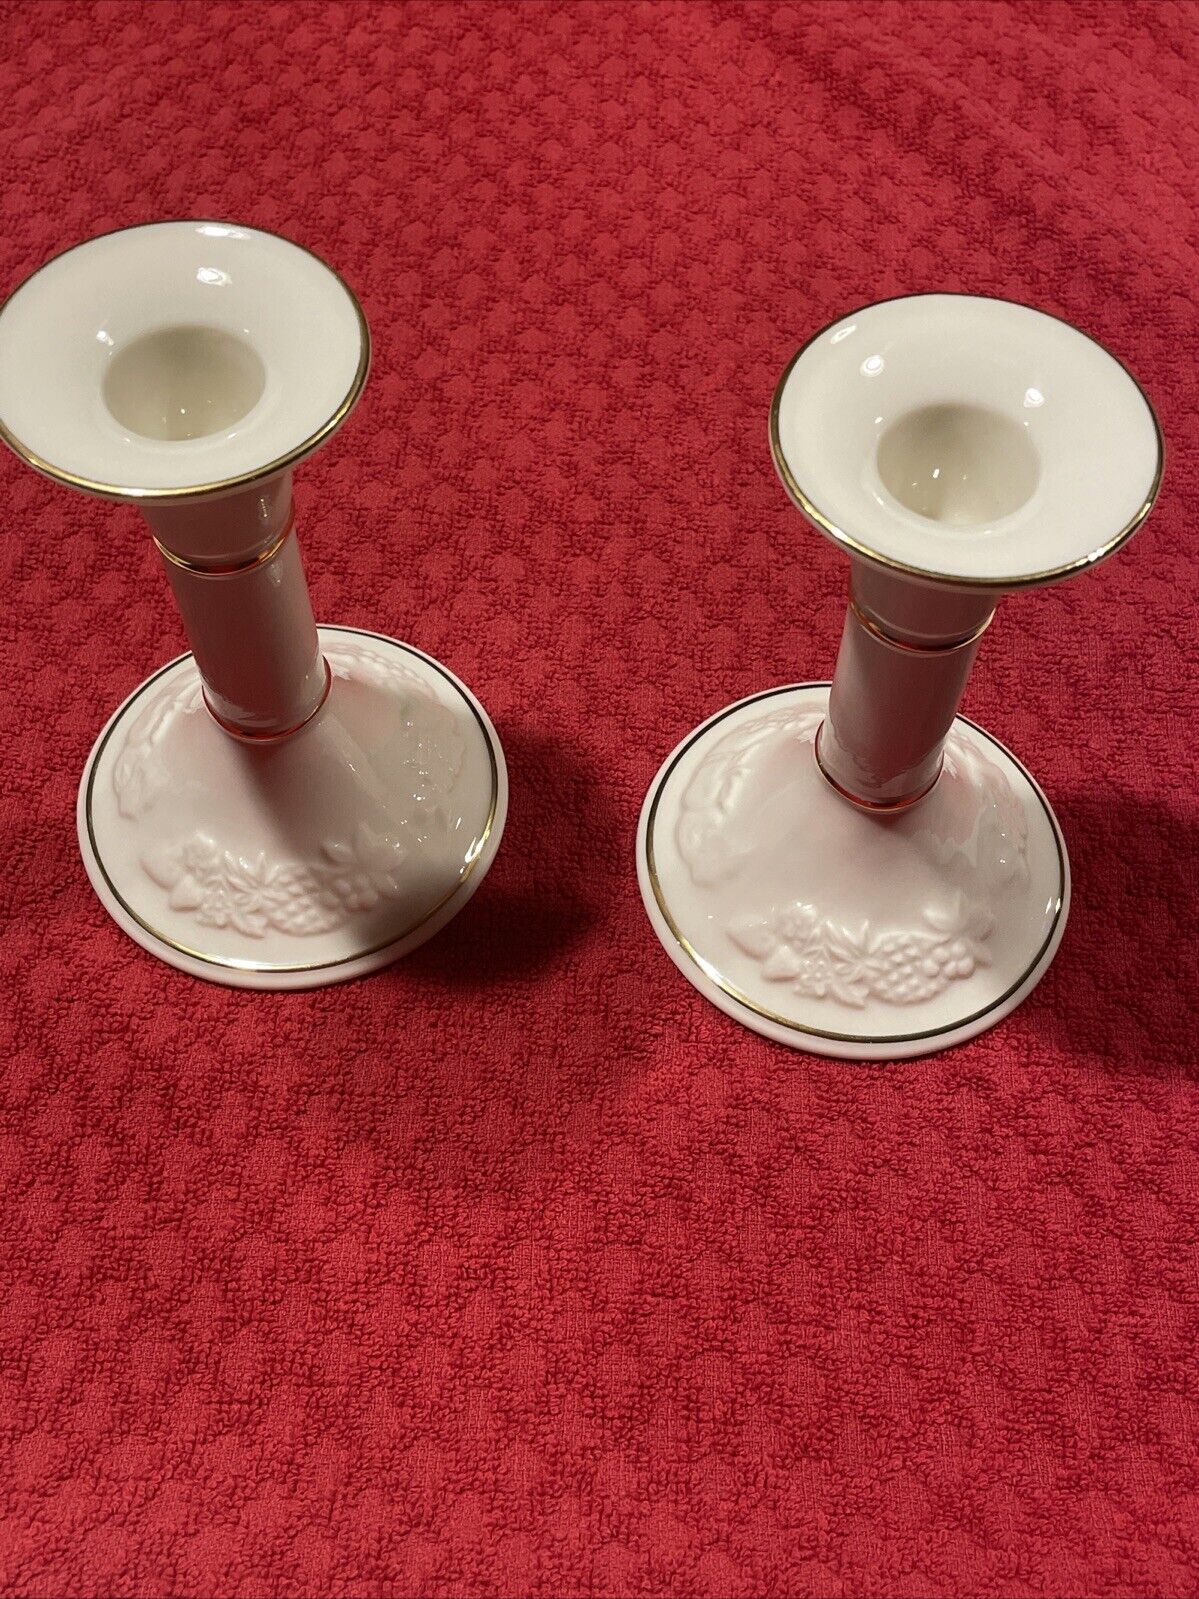 Lenox 1989 “Fruits of Life”Candlestick Pair  NOS, Tags On, No Box